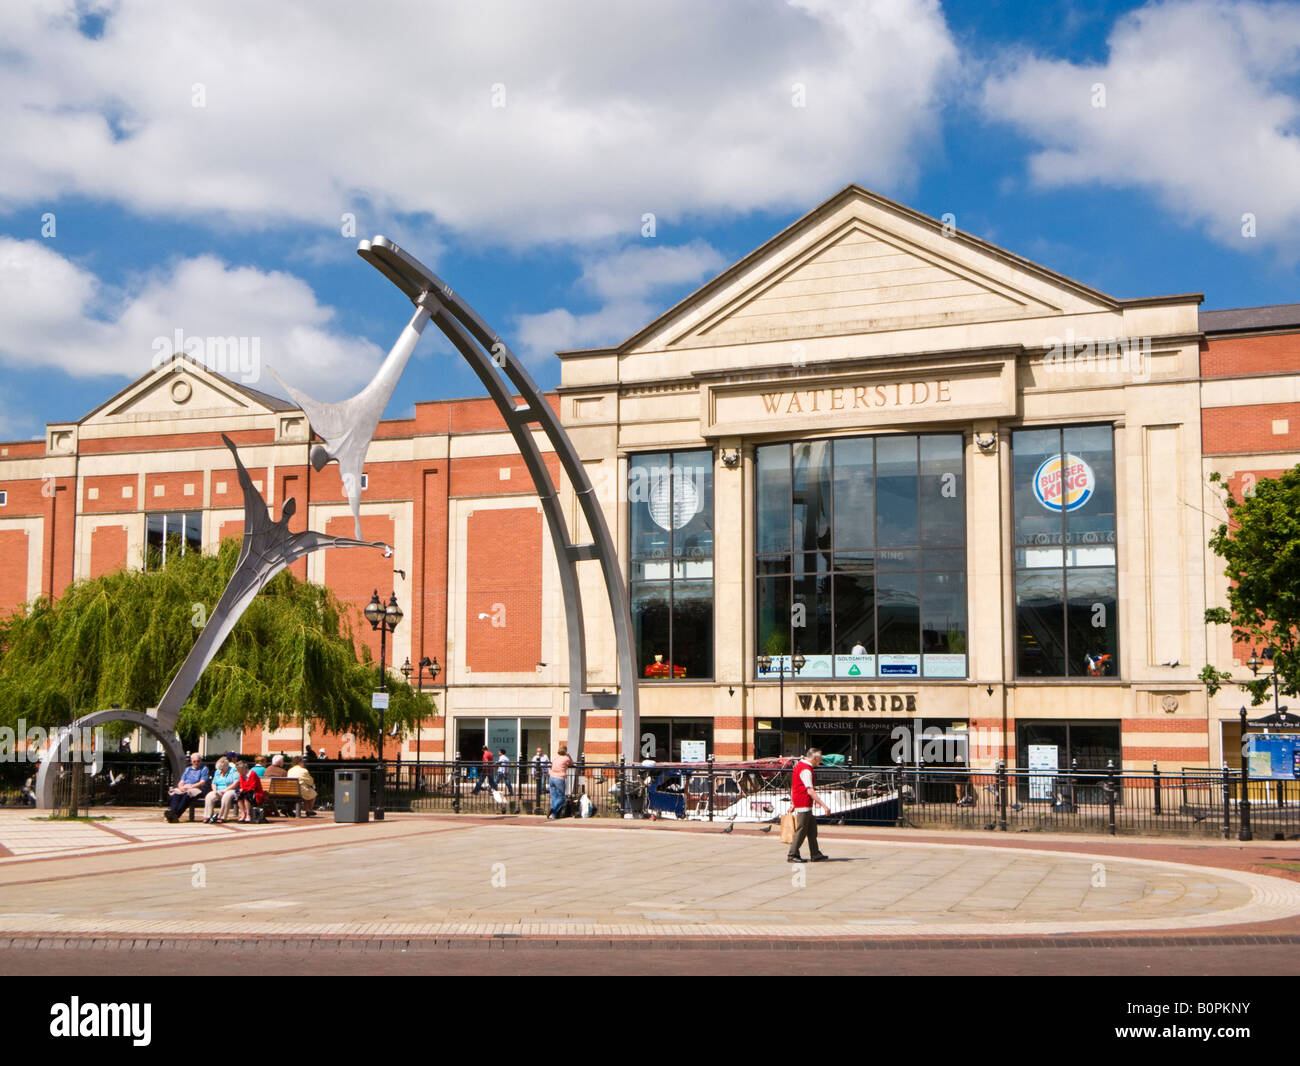 Lincoln, UK - The Empowerment Sculpture and Waterside shopping centre exterior Stock Photo